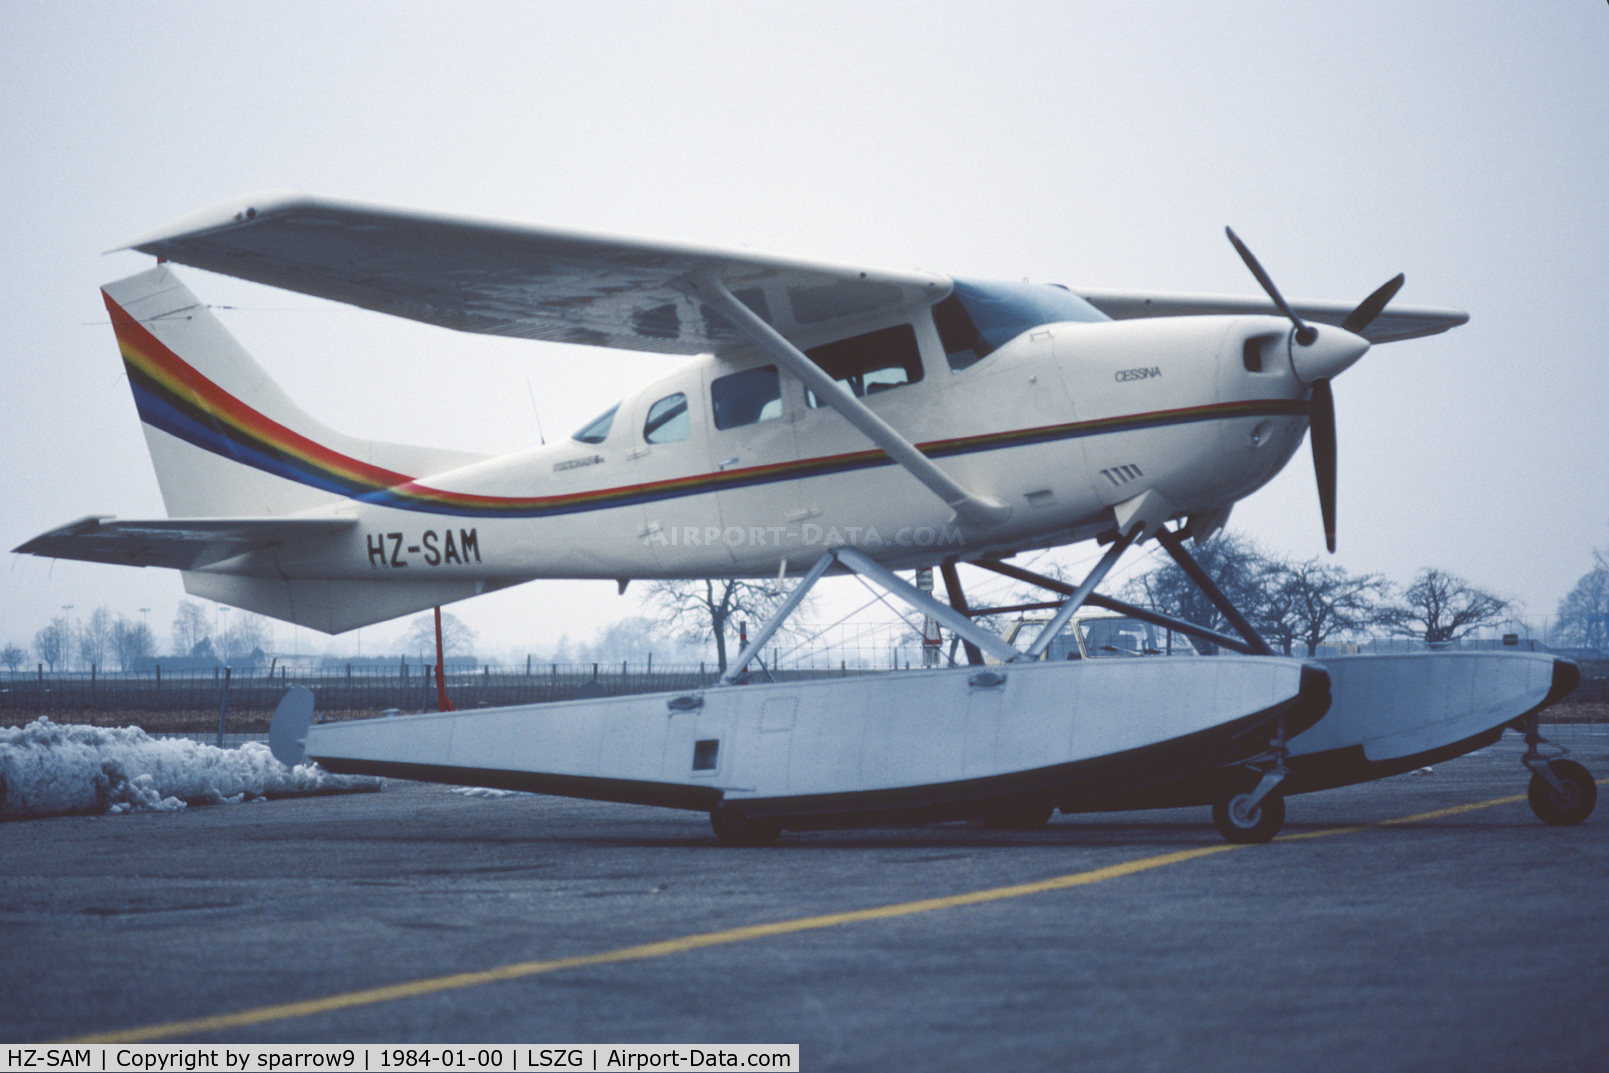 HZ-SAM, 1977 Cessna U206G Stationair C/N U20604128, An amphibian plane from the desert in a country where the snow just melted